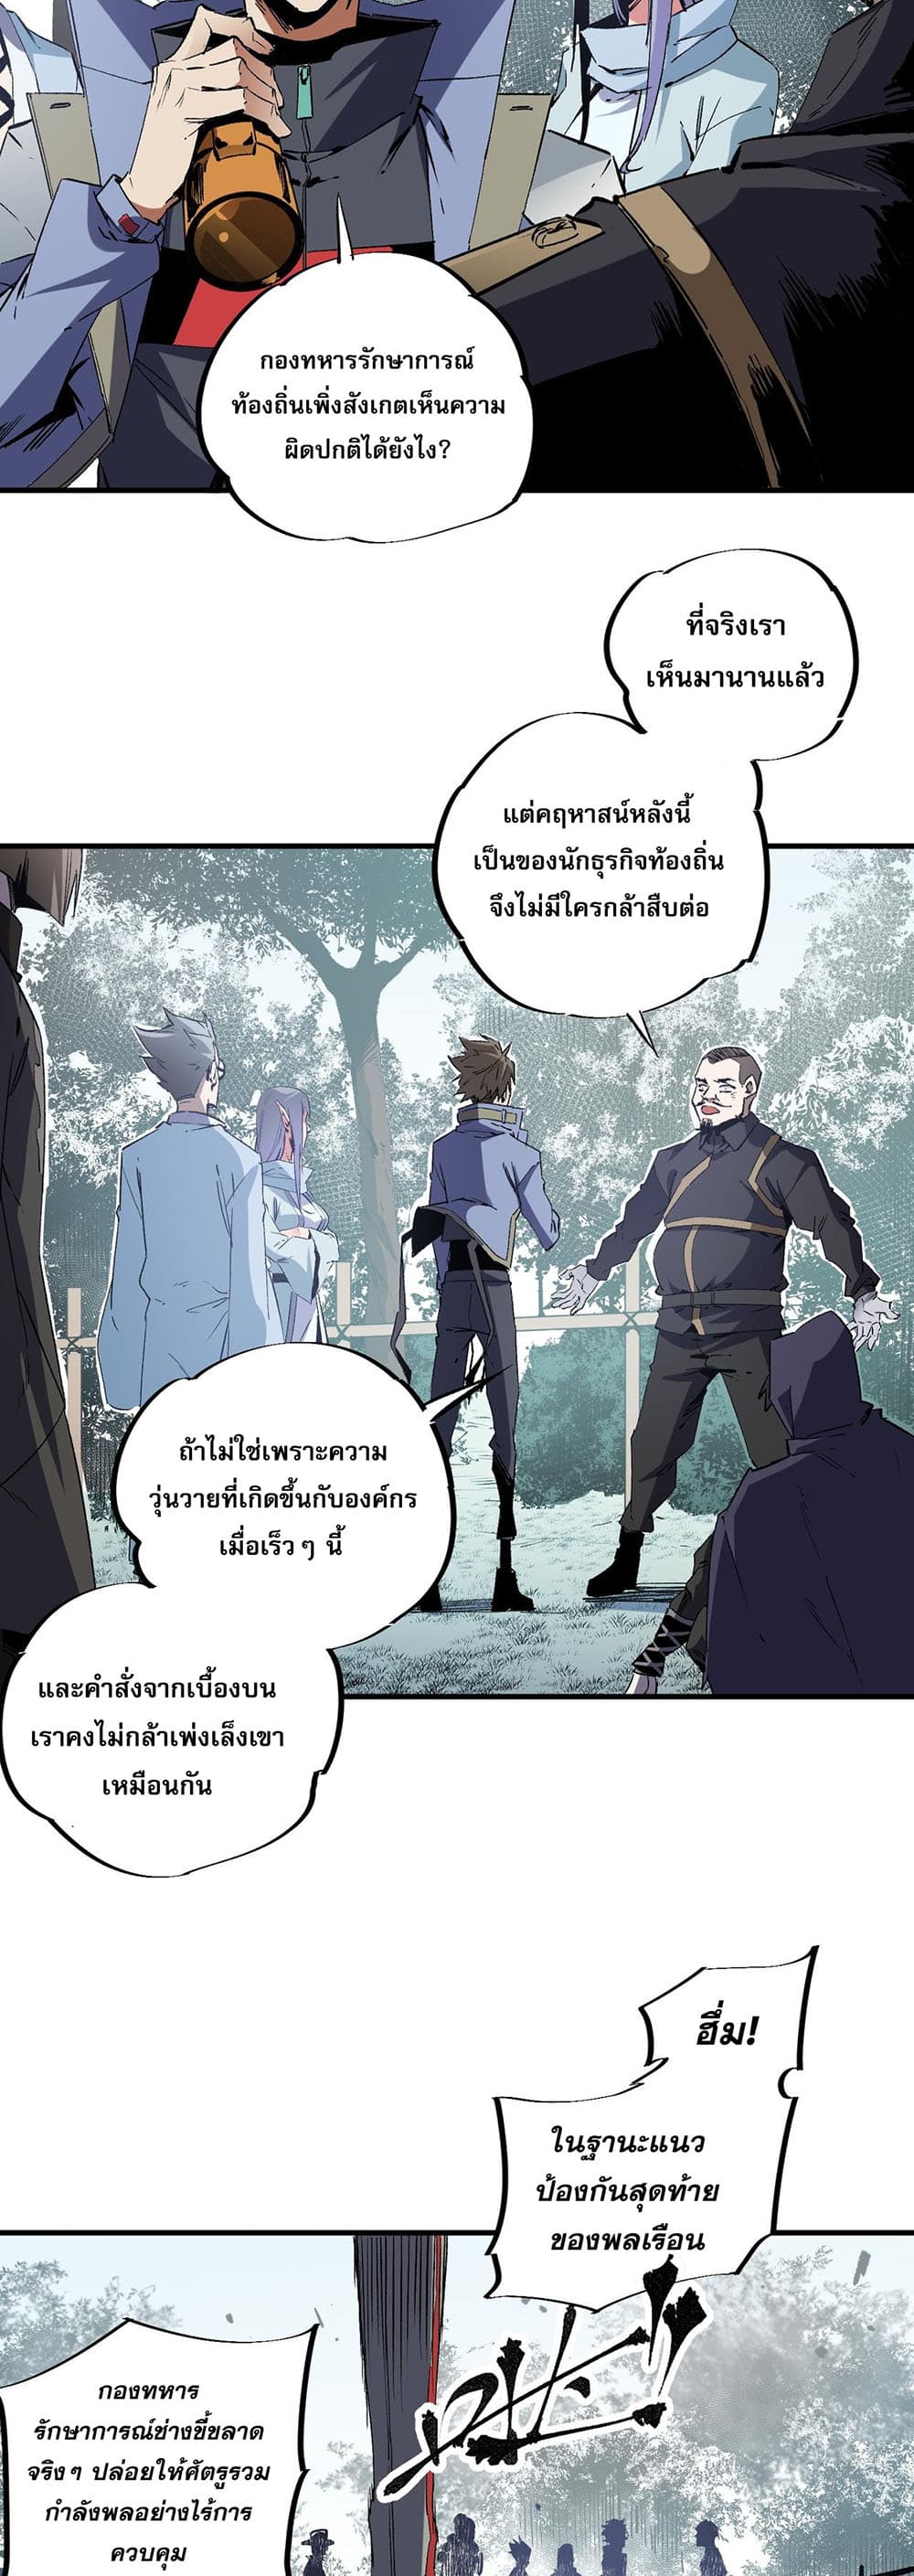 Job Changing for the Entire Population: The Jobless Me Will Terminate the Gods ฉันคือผู้เล่นไร้อาชีพที่สังหารเหล่าเทพ 51-51